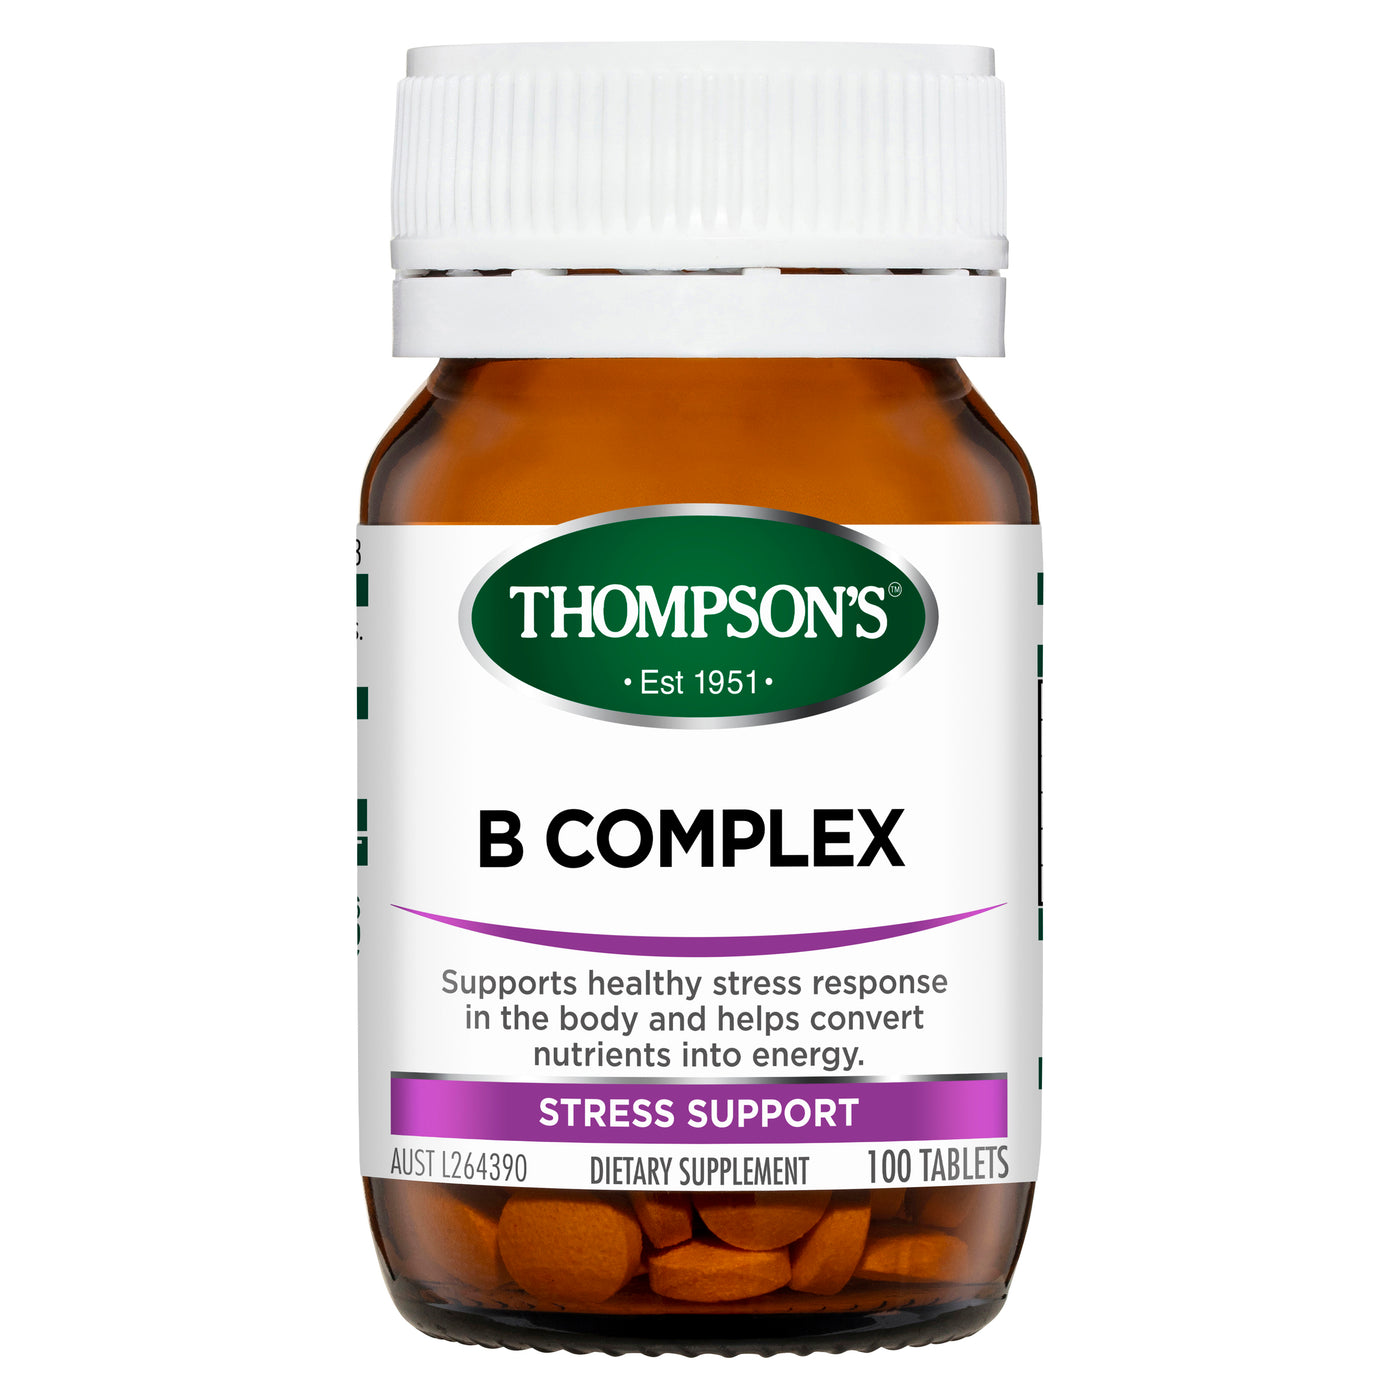 Thompsons B Complex Stress Support 100 tablets